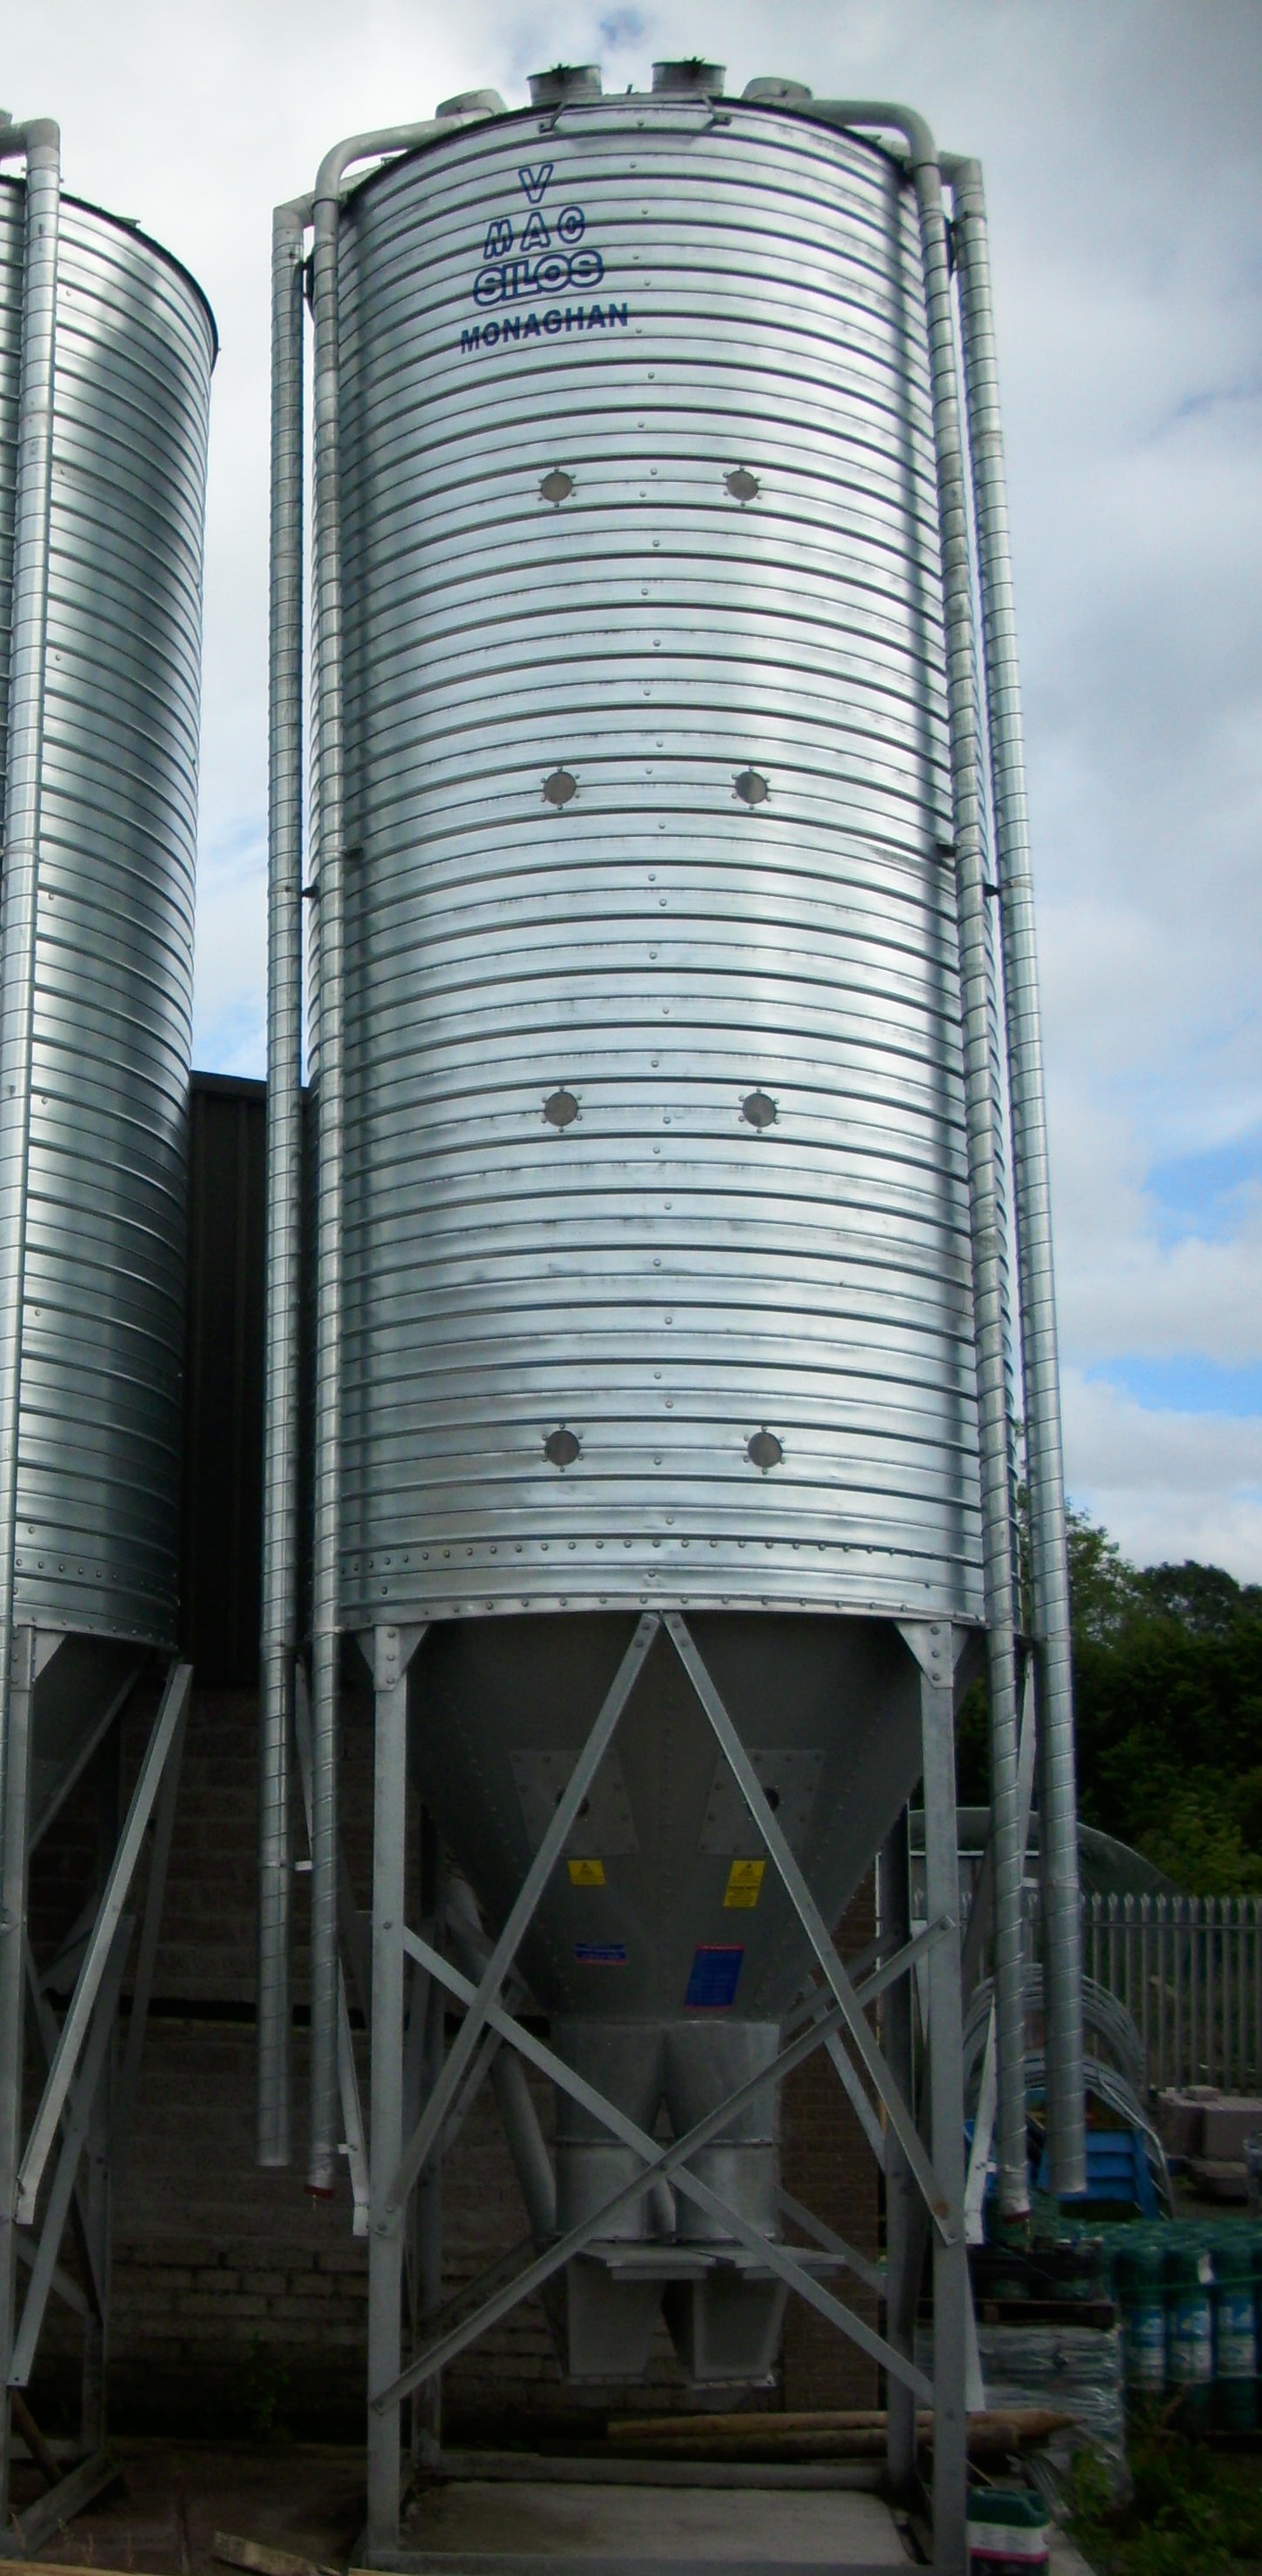 Grain Bins vs. Silos: What's the Difference?